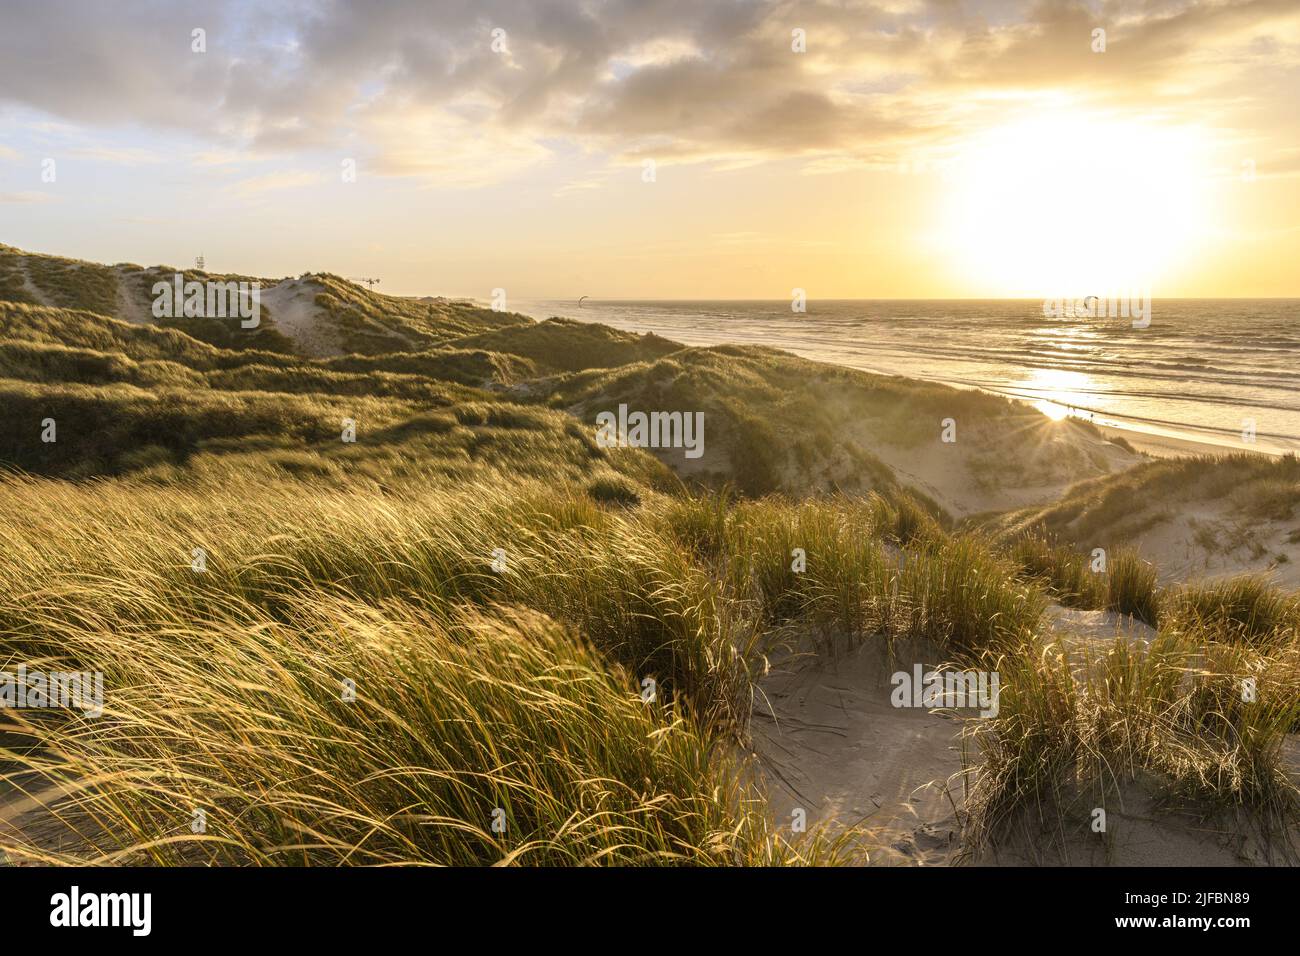 France, Somme, Baie de Somme, Saint-Valery-sur-Somme, The dunes of Marquenterre between Fort-Mahon and the Baie d'Authie at sunset Stock Photo